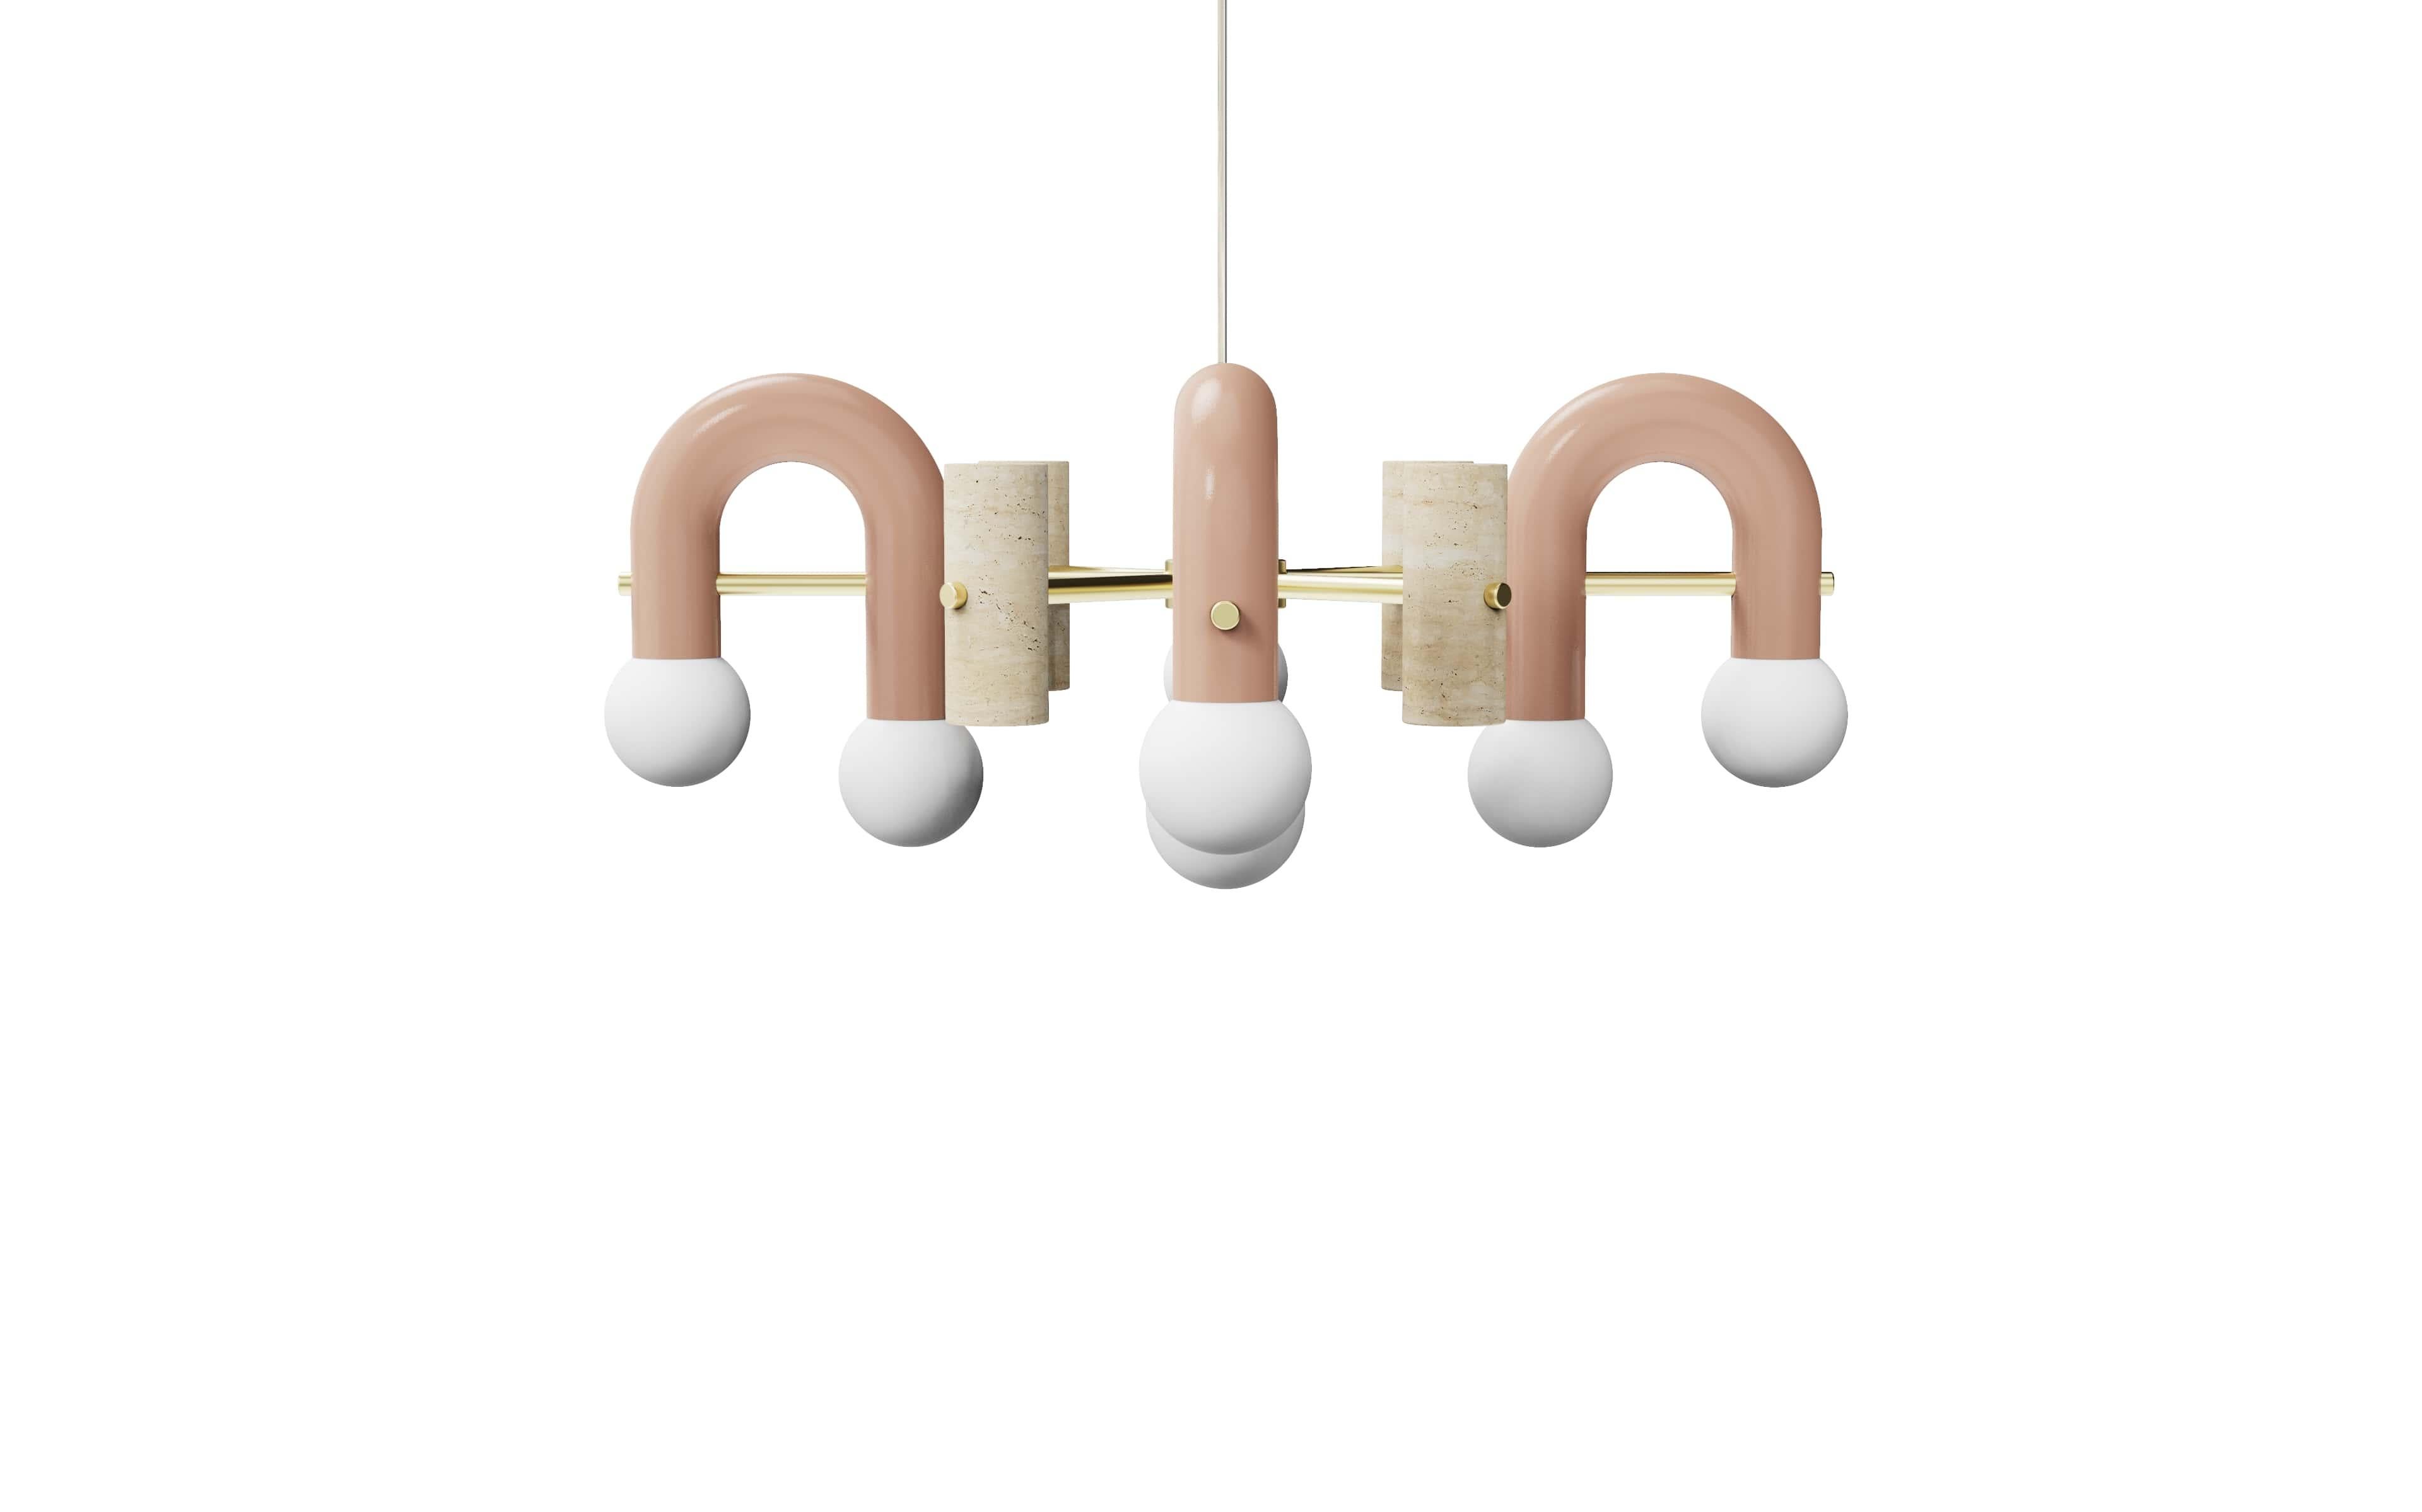 Pyppe suspension lamp 100 by Utu Lamps
Dimensions: 36 x 100 x 100 cm
Materials: Lacquered metal, brass, nickel/copper, travertine

All our lamps can be wired according to each country. If sold to the USA it will be wired for the USA for